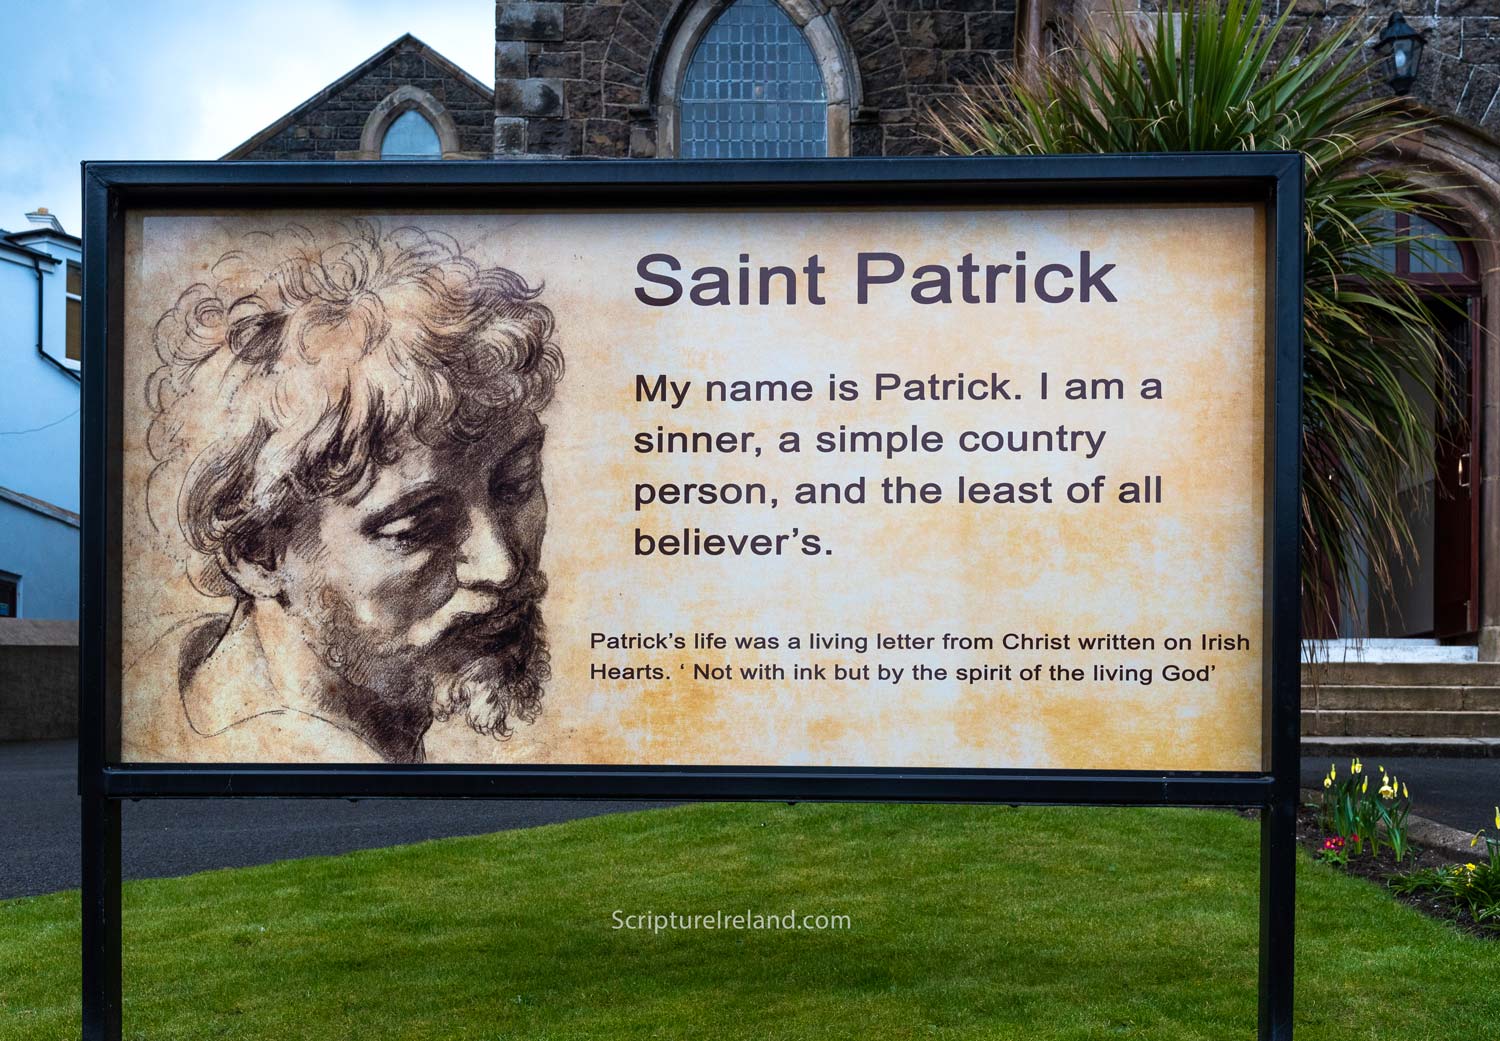 Portrush Presbyterian Church paid their own tribute to St Patrick with this poster outside the church